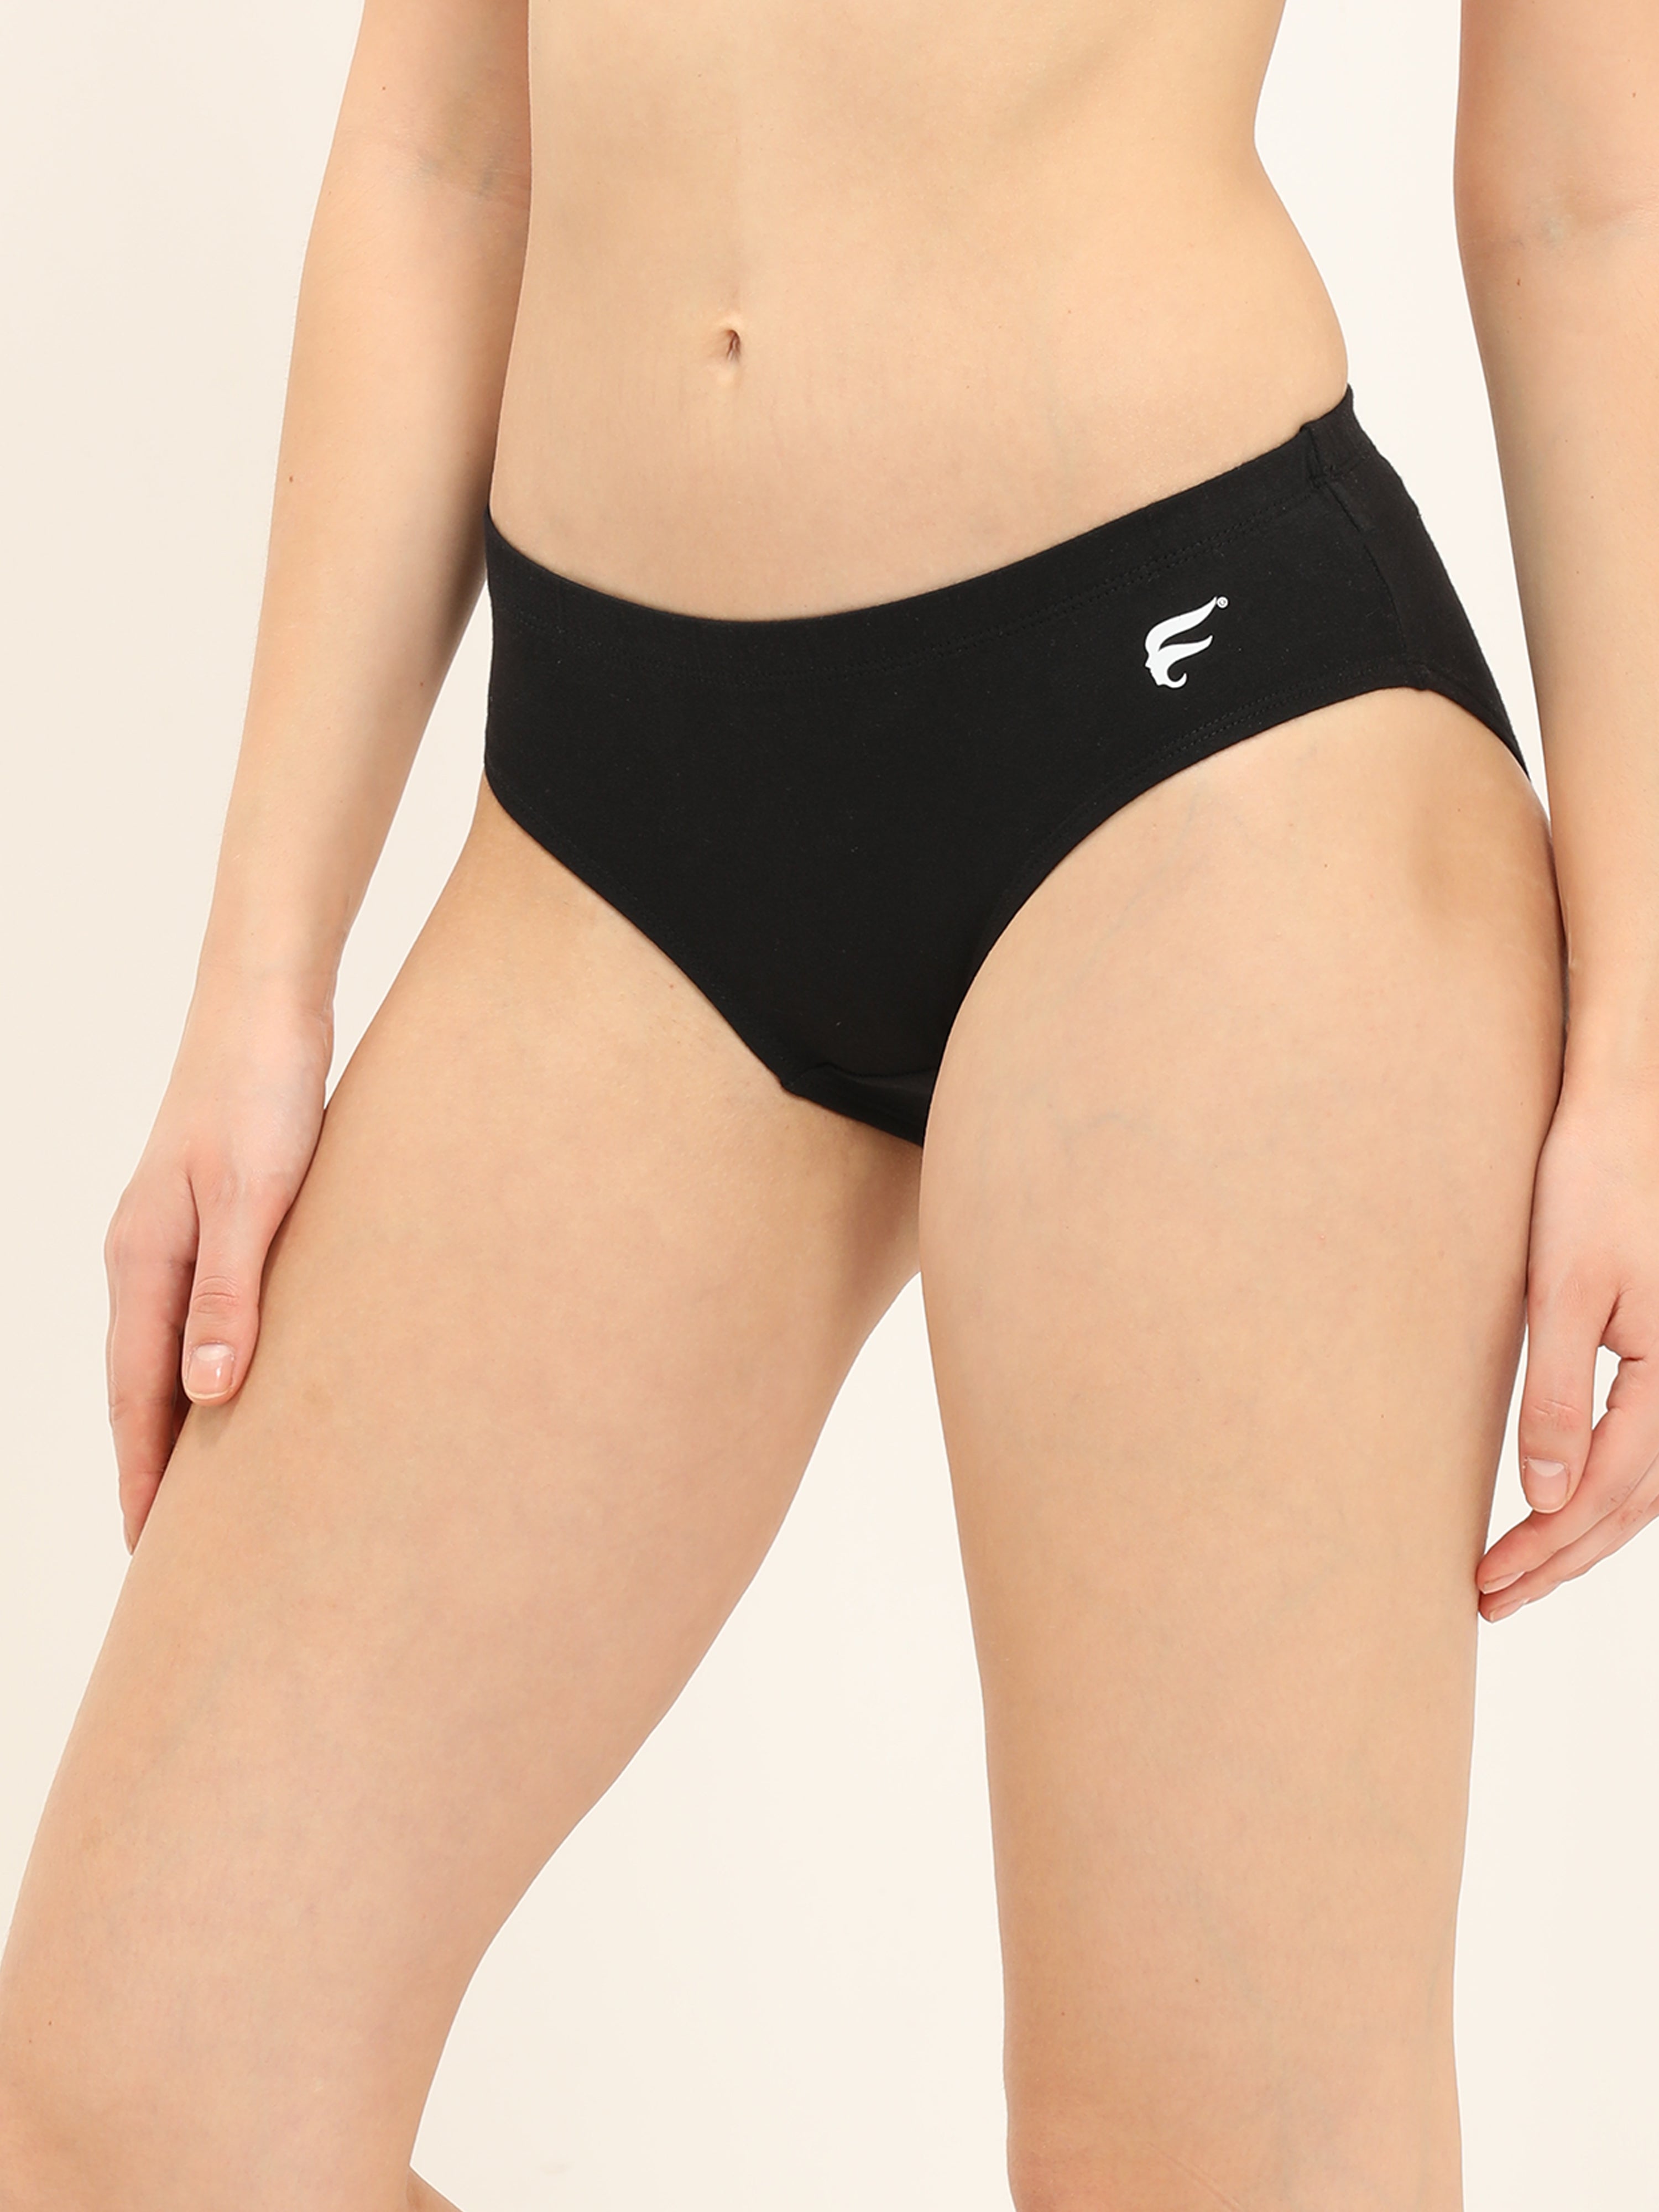 Envie Brief, Low rise panty (Pack of 3) Combo Blue curaco, Brown, Black